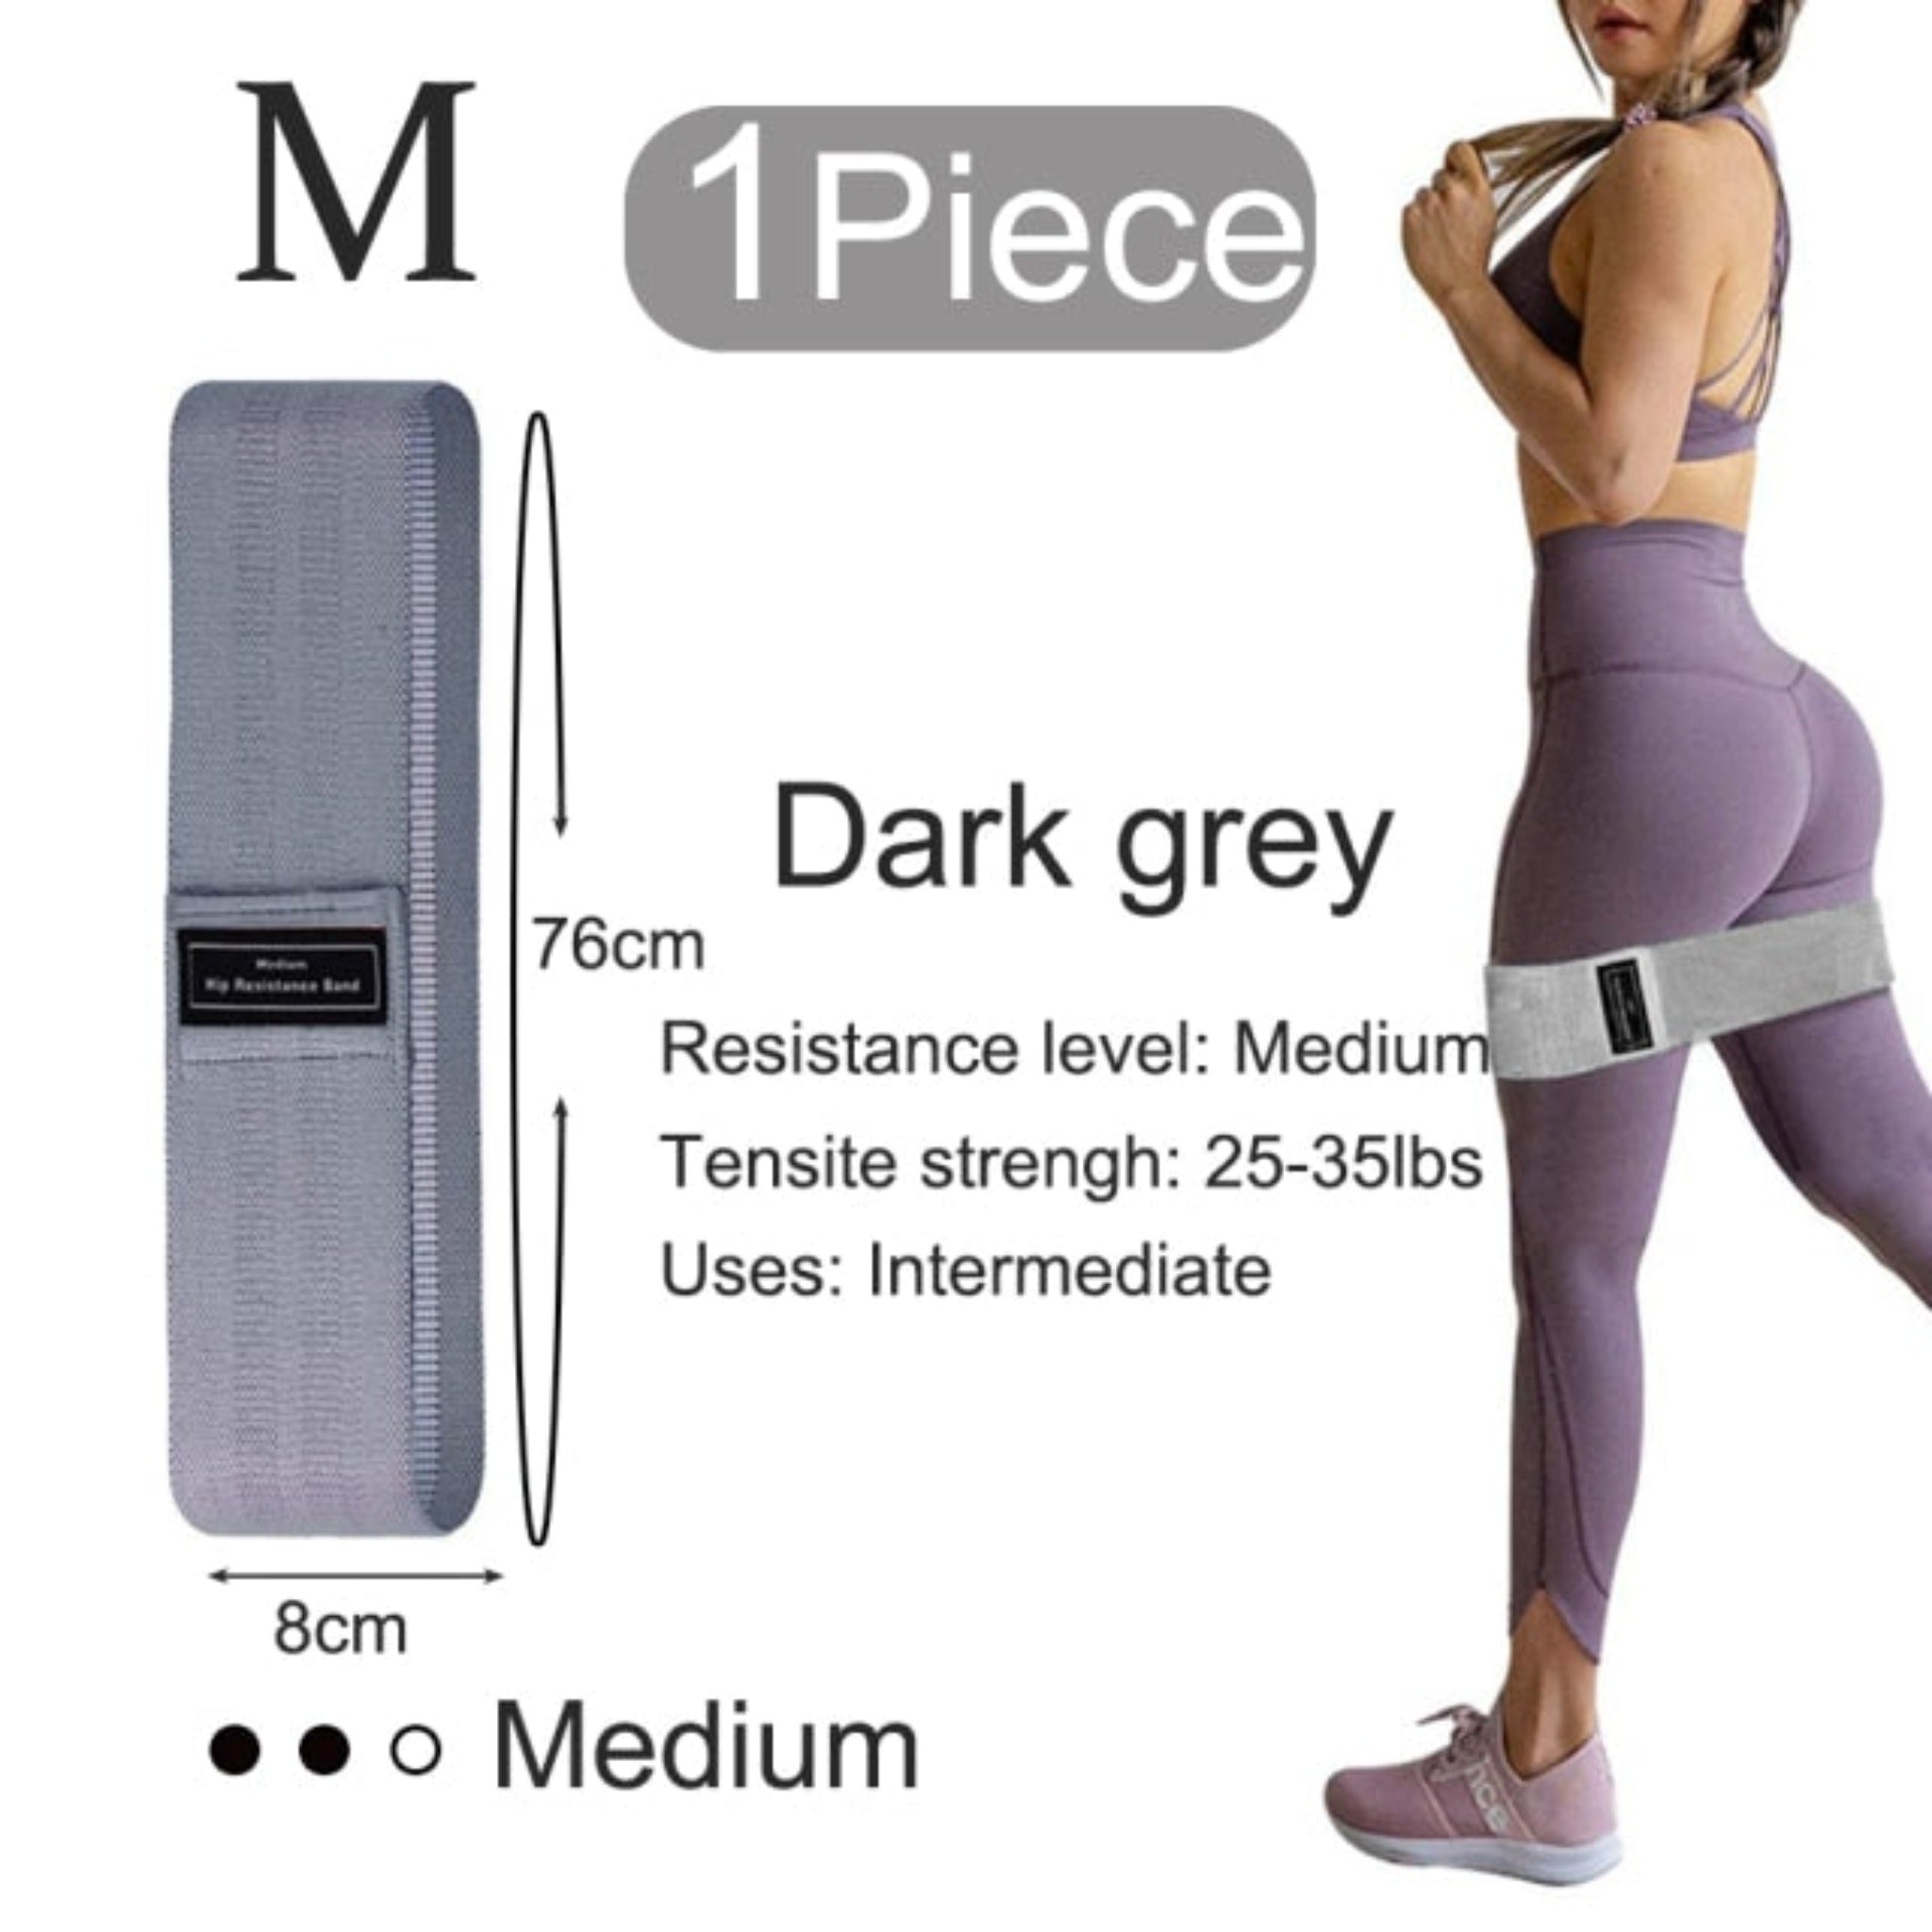 1 piece fark gray booty resistance bands with girl using them and white background